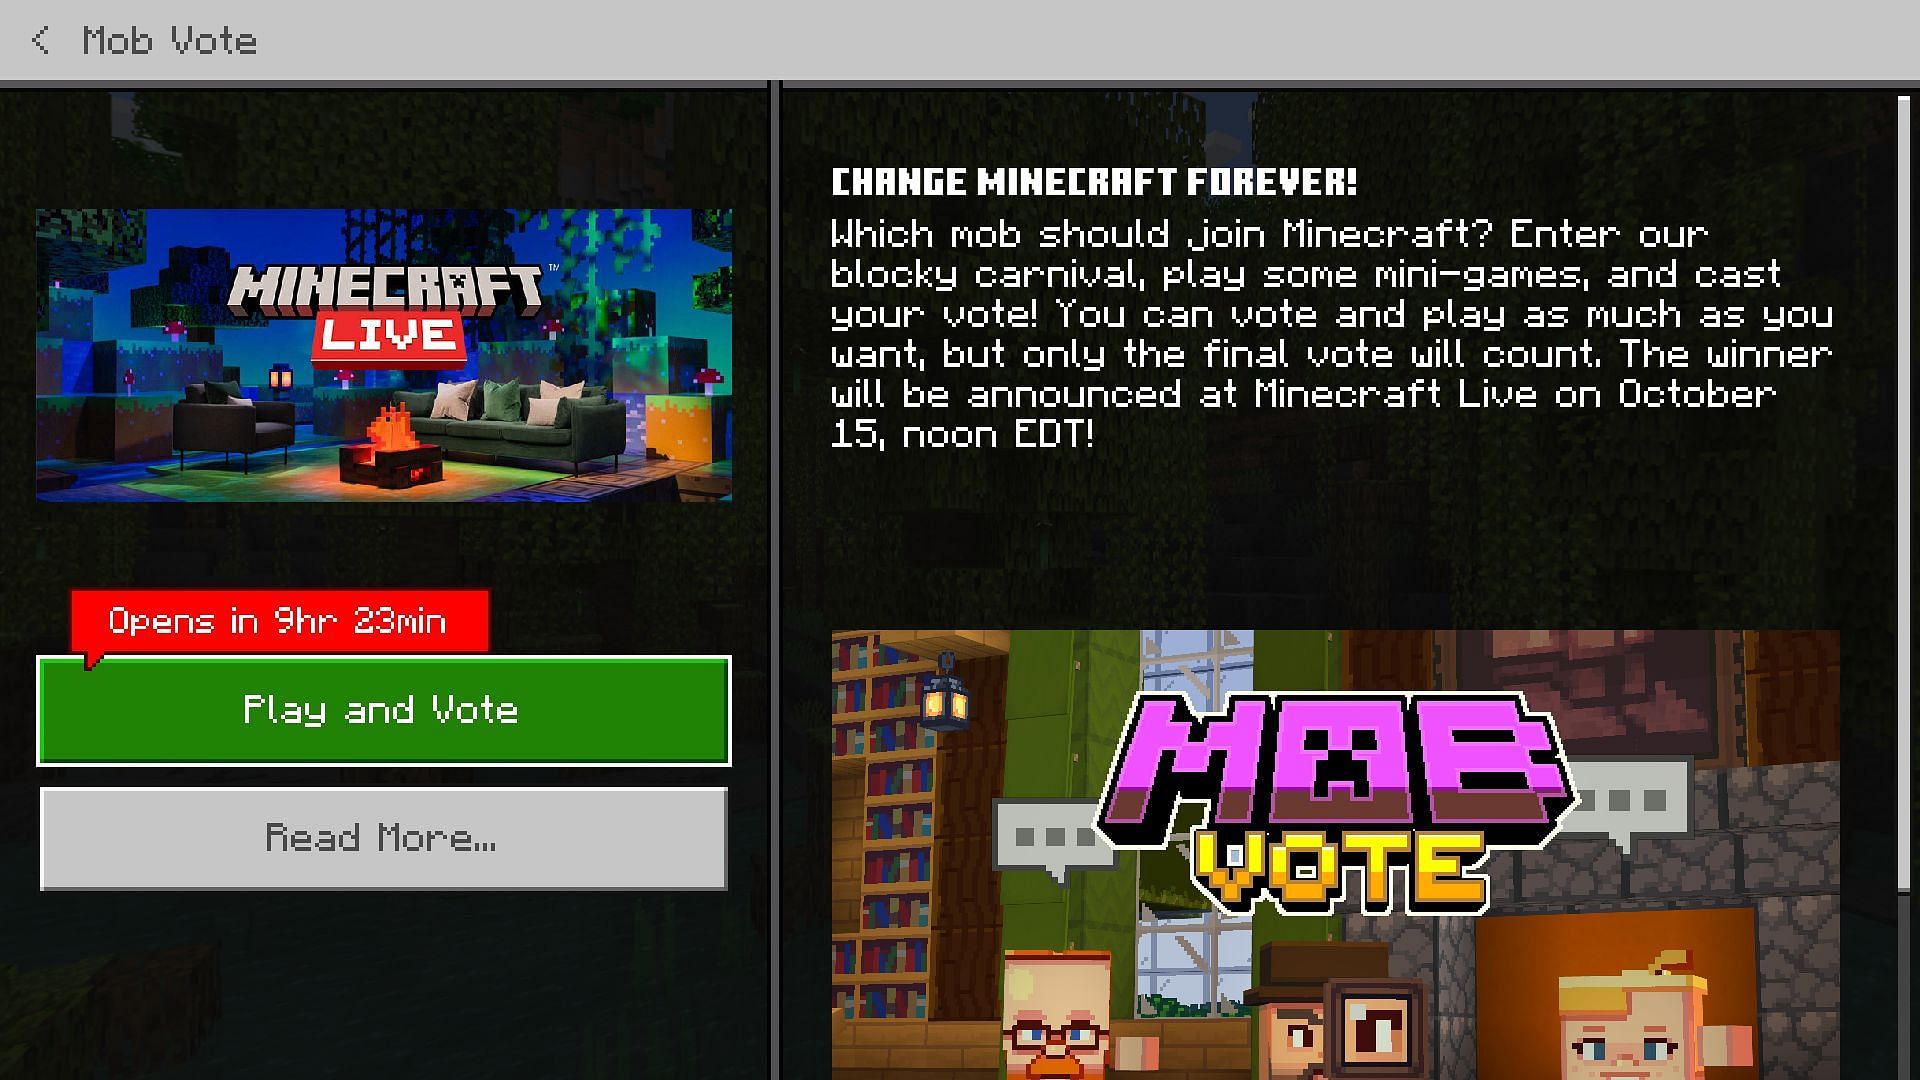 The main page of the mob vote inside Minecraft Bedrock Edition with the button to join the map (Image via Mojang)